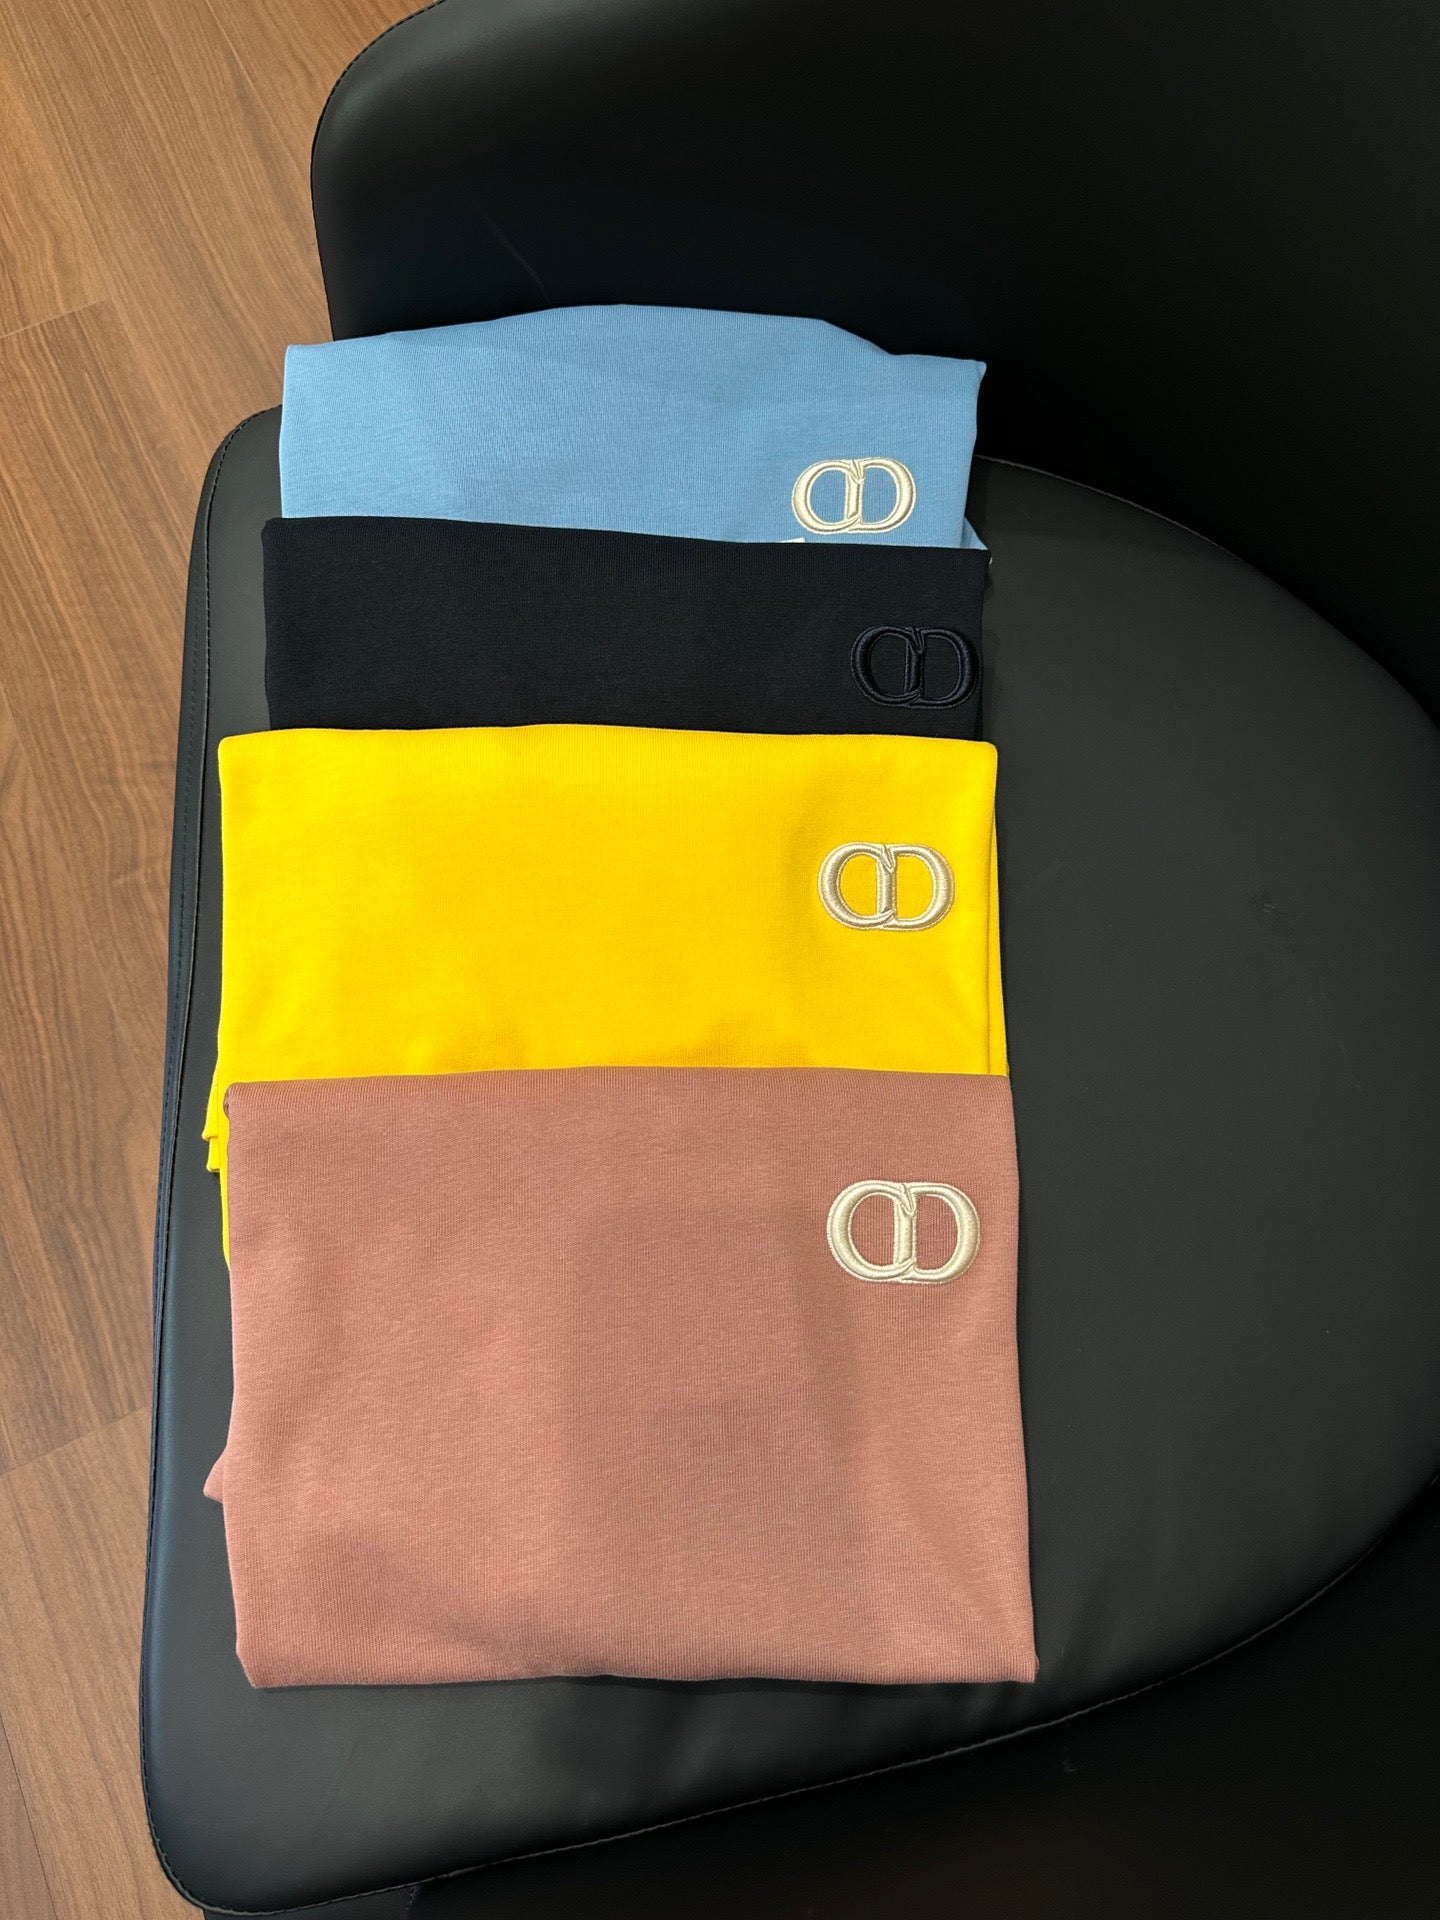 Blue, Yellow, Brown and Black T-shirt